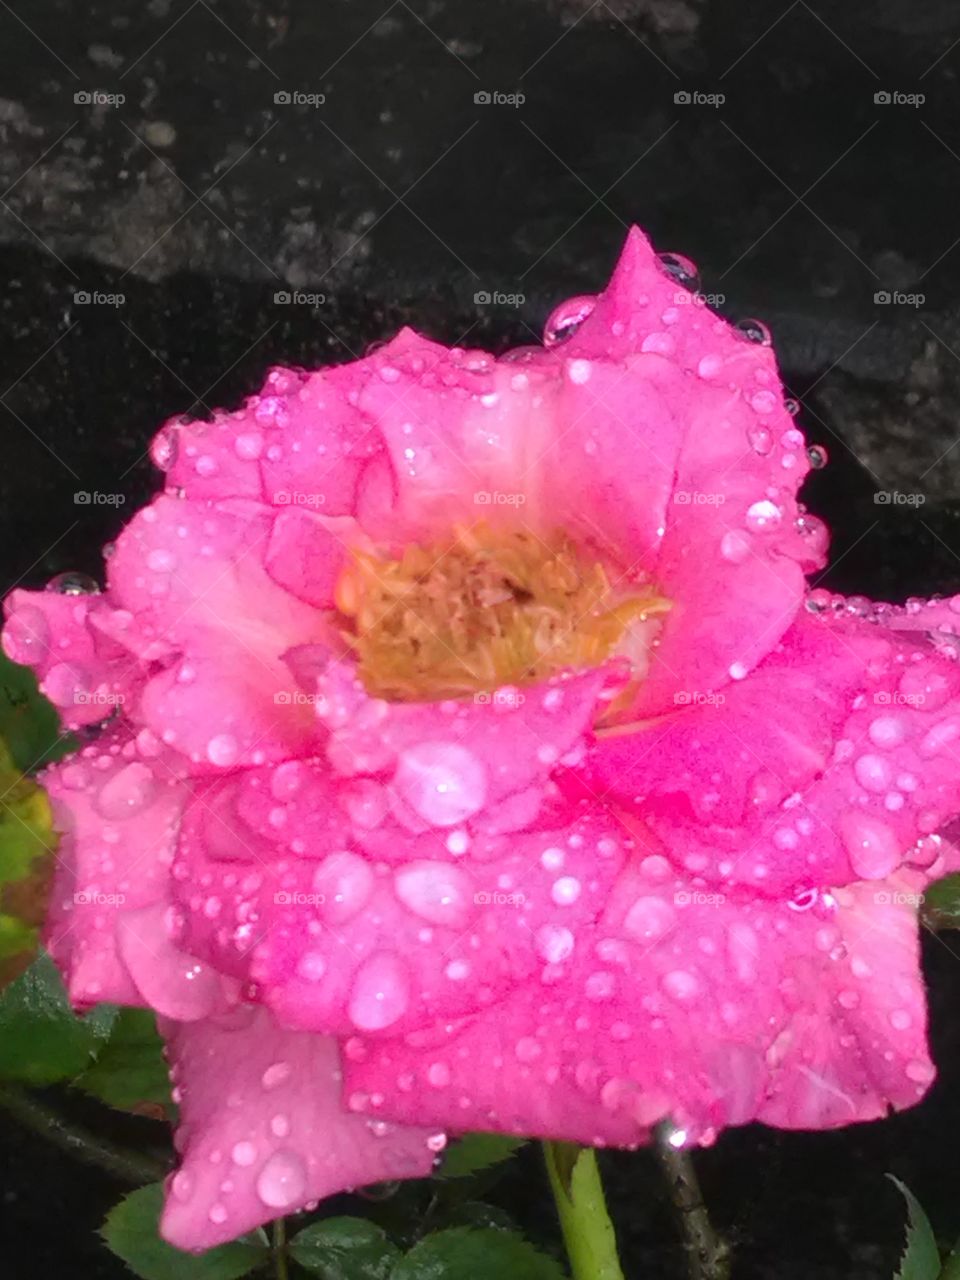 This is a very beautiful flower pink rose on the drops of watet.